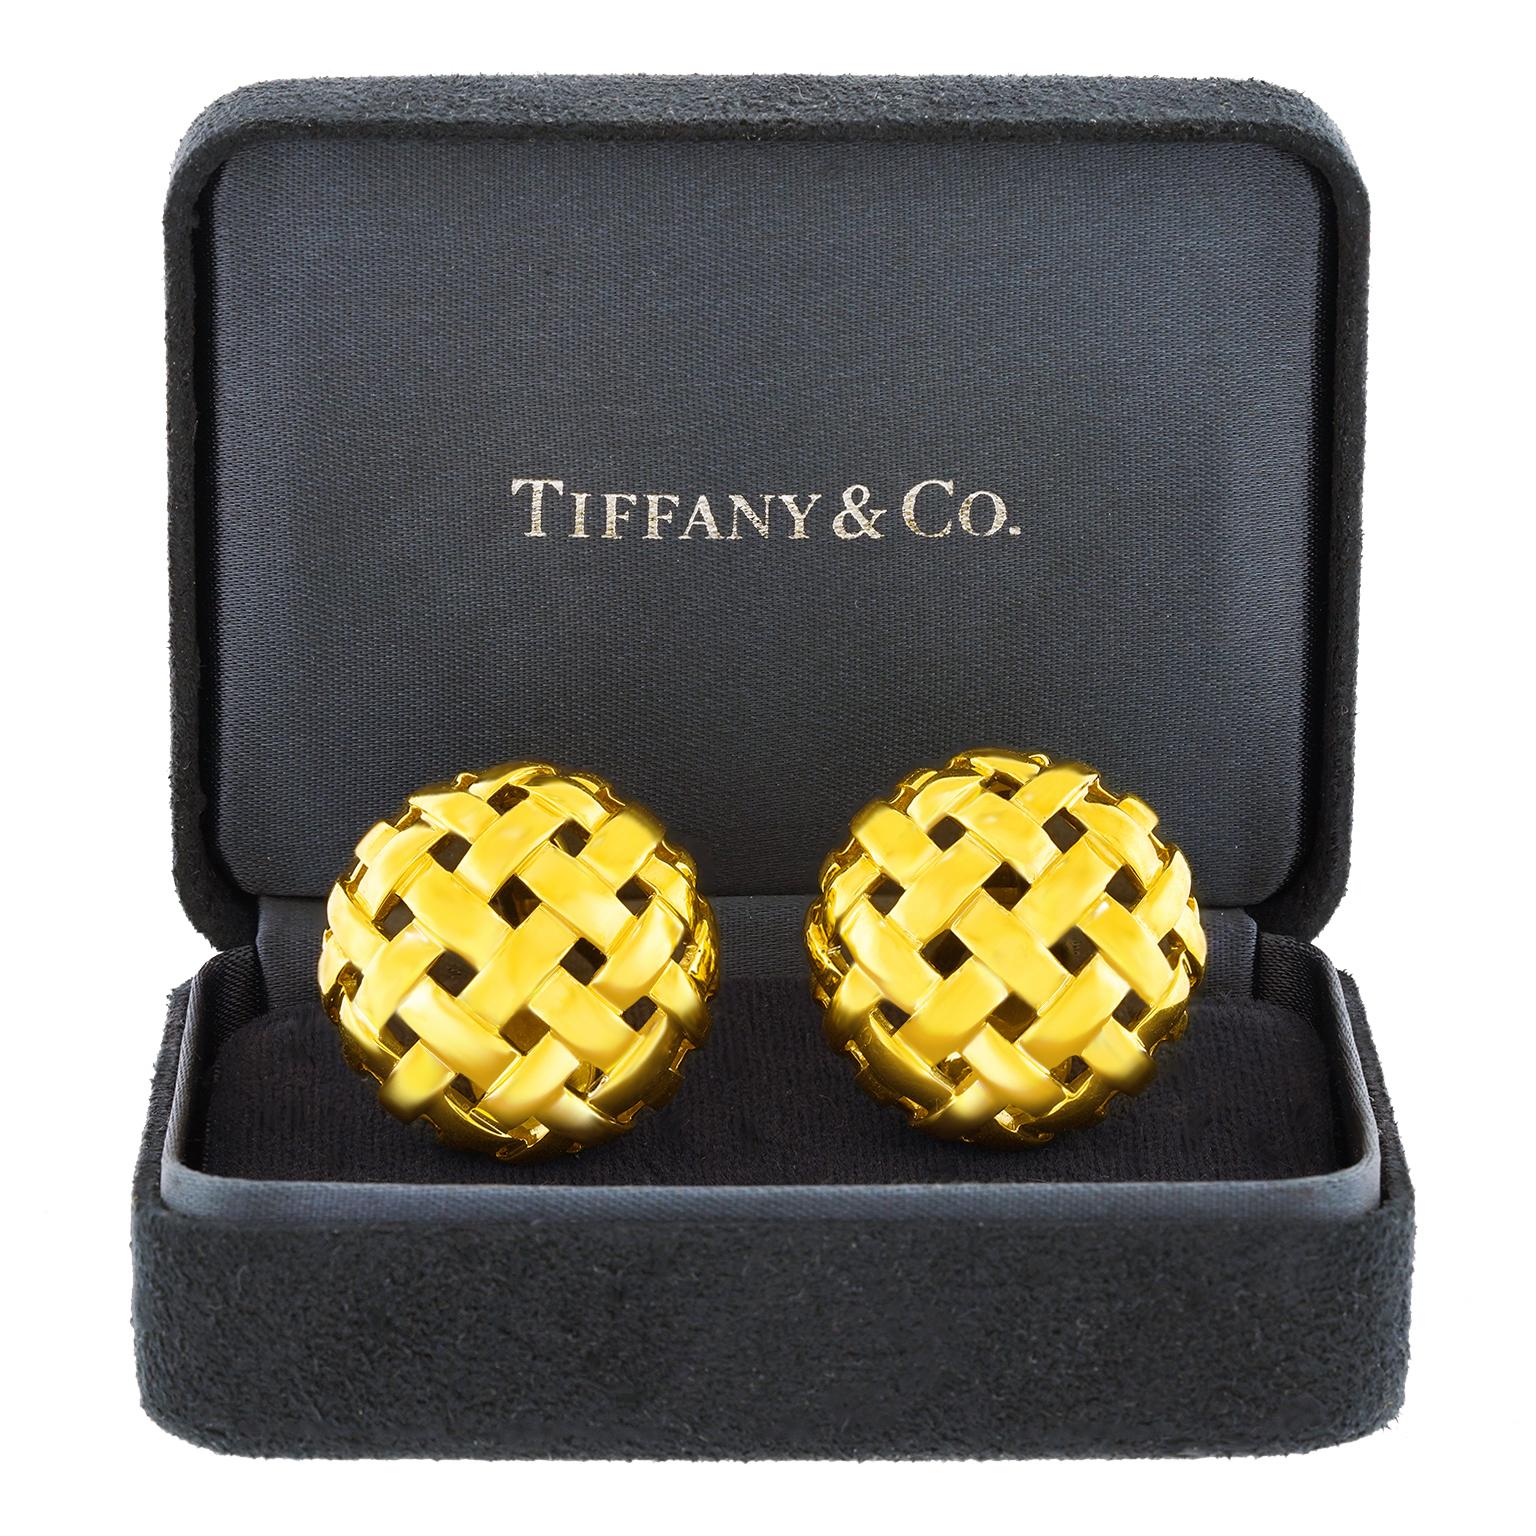 Tiffany & Co. Larger Yellow Gold Vannerie Earrings In Excellent Condition For Sale In Litchfield, CT